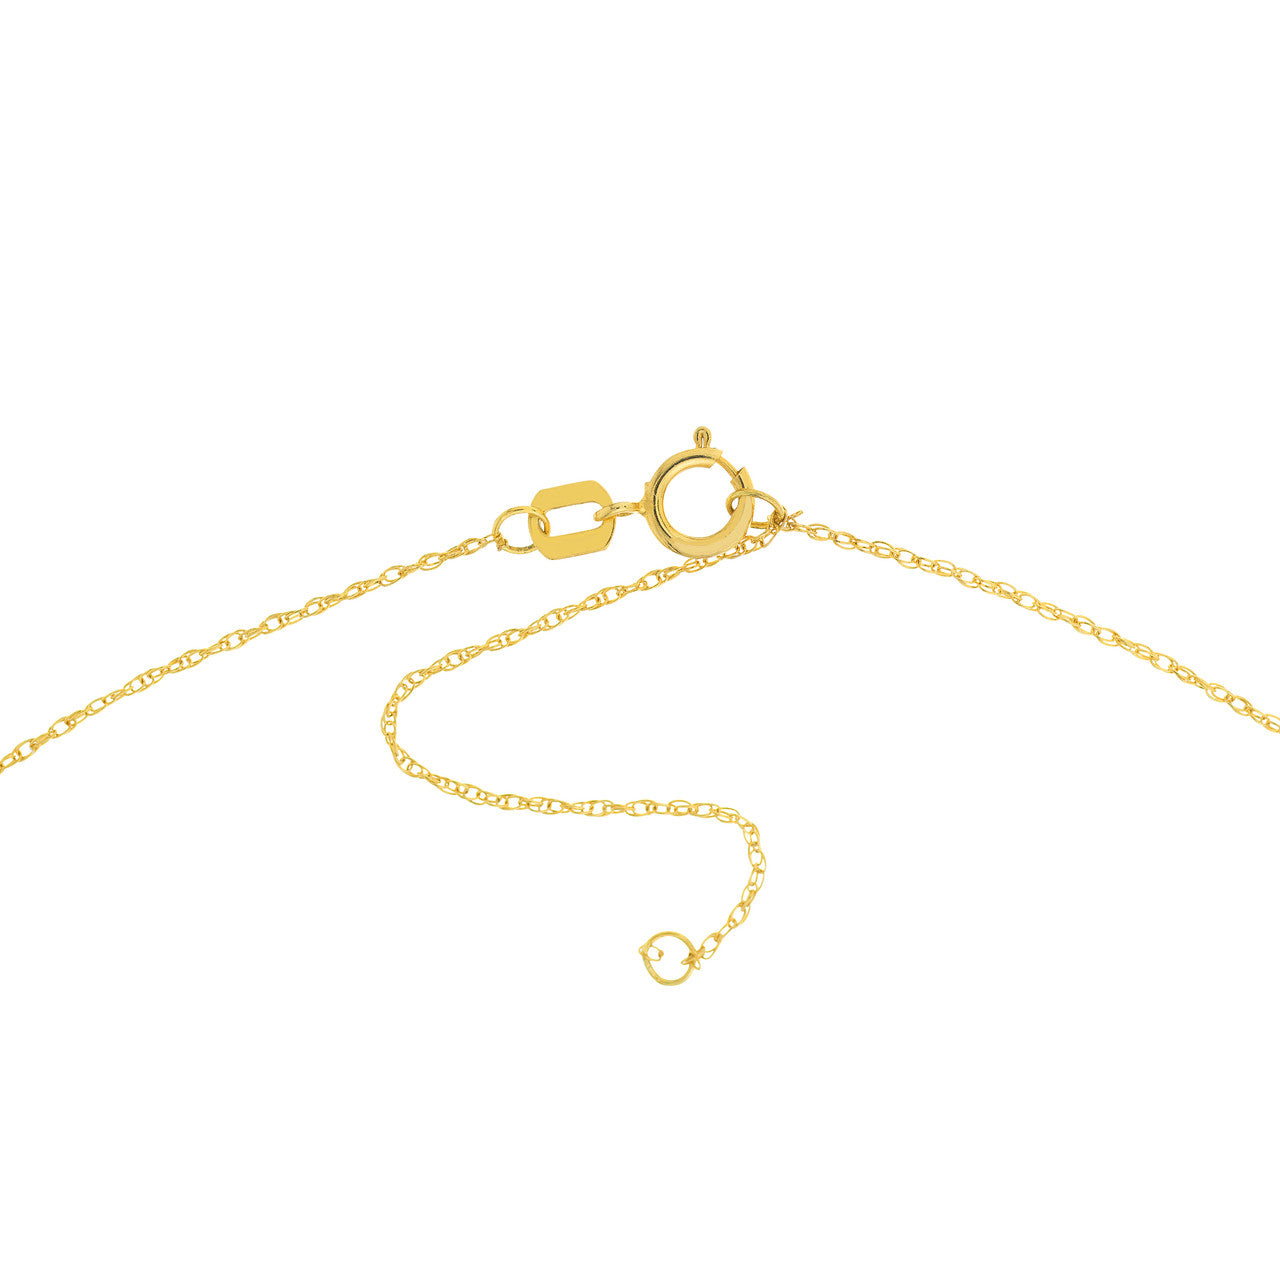 14K Solid Gold - LOVE in Heart Necklace